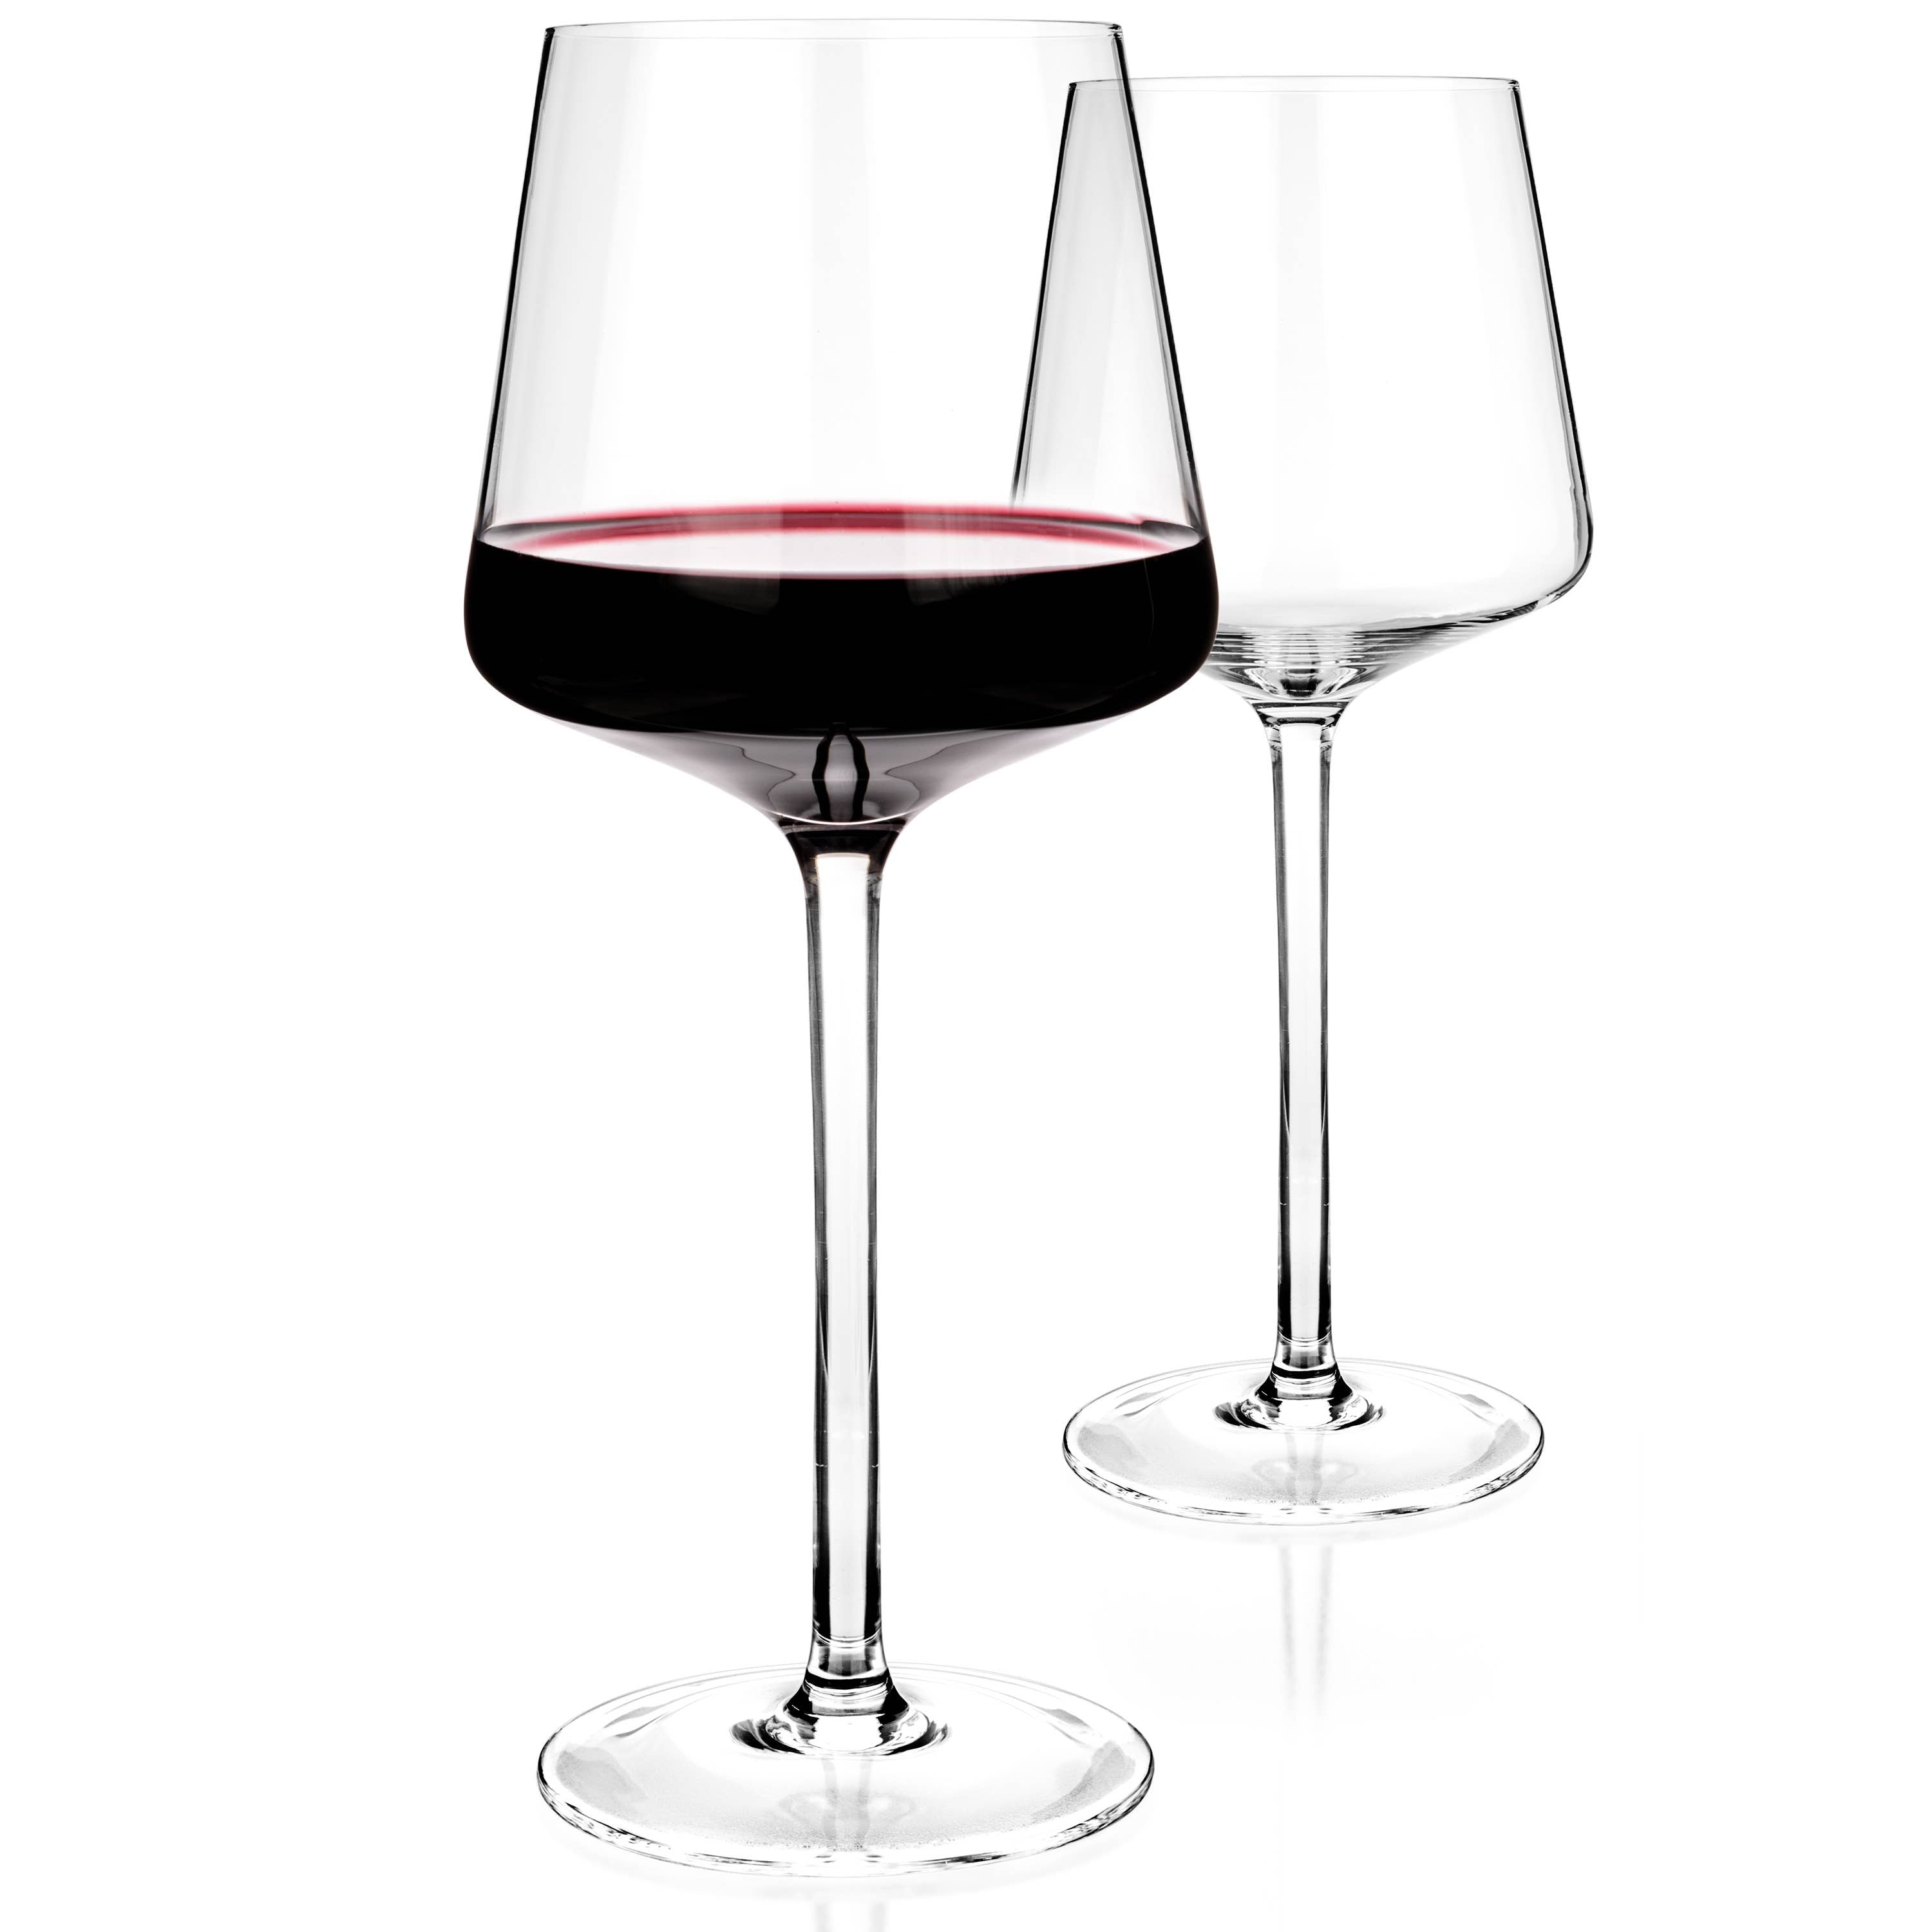 Luxbe - Wine Crystal Glasses Set of 4/6, 20.5 oz Large Tall: Set of 4